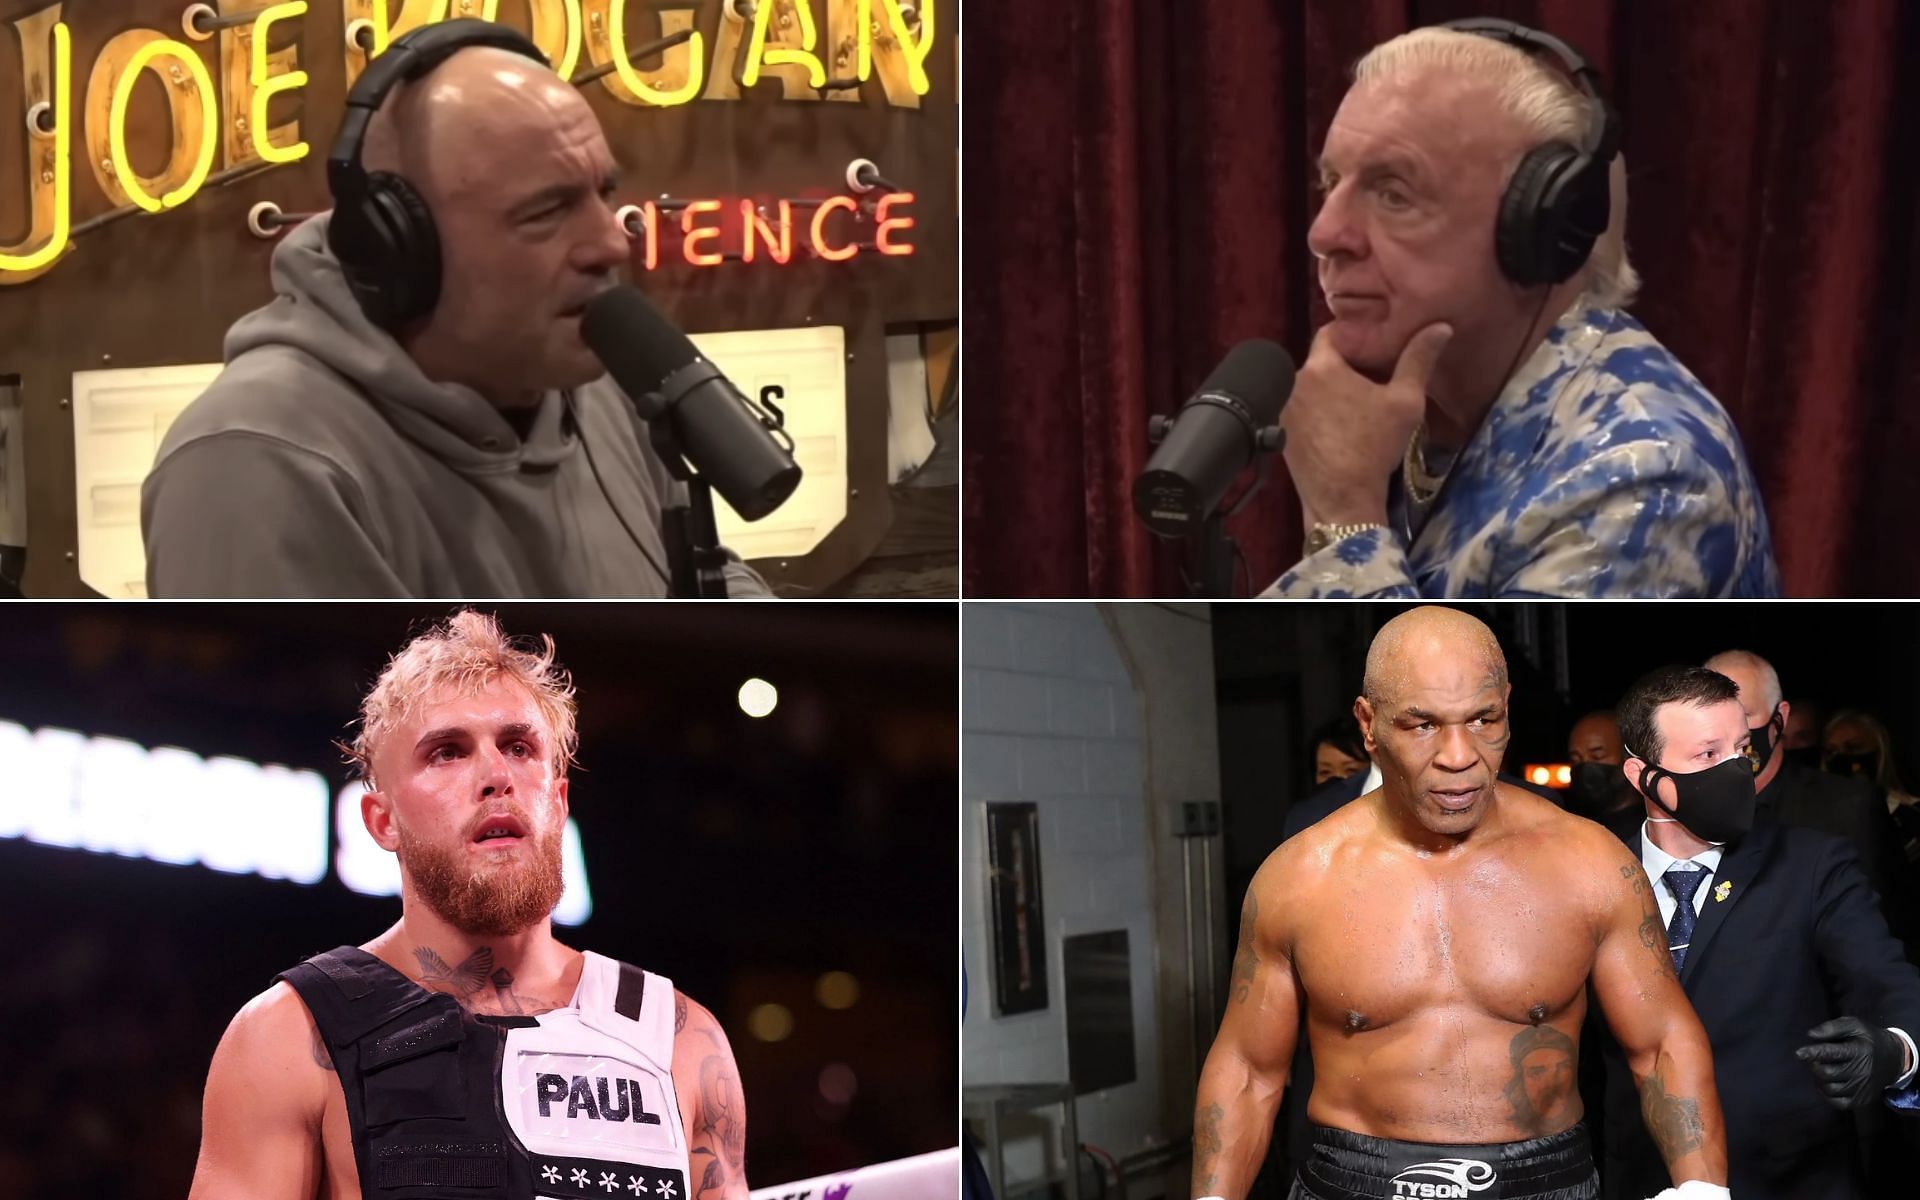 Joe Rogan and Ric Flair, and Jake Paul and Mike Tyson [Bottom] [Photo credit: Daily Dose of PODCASTS - YouTube]